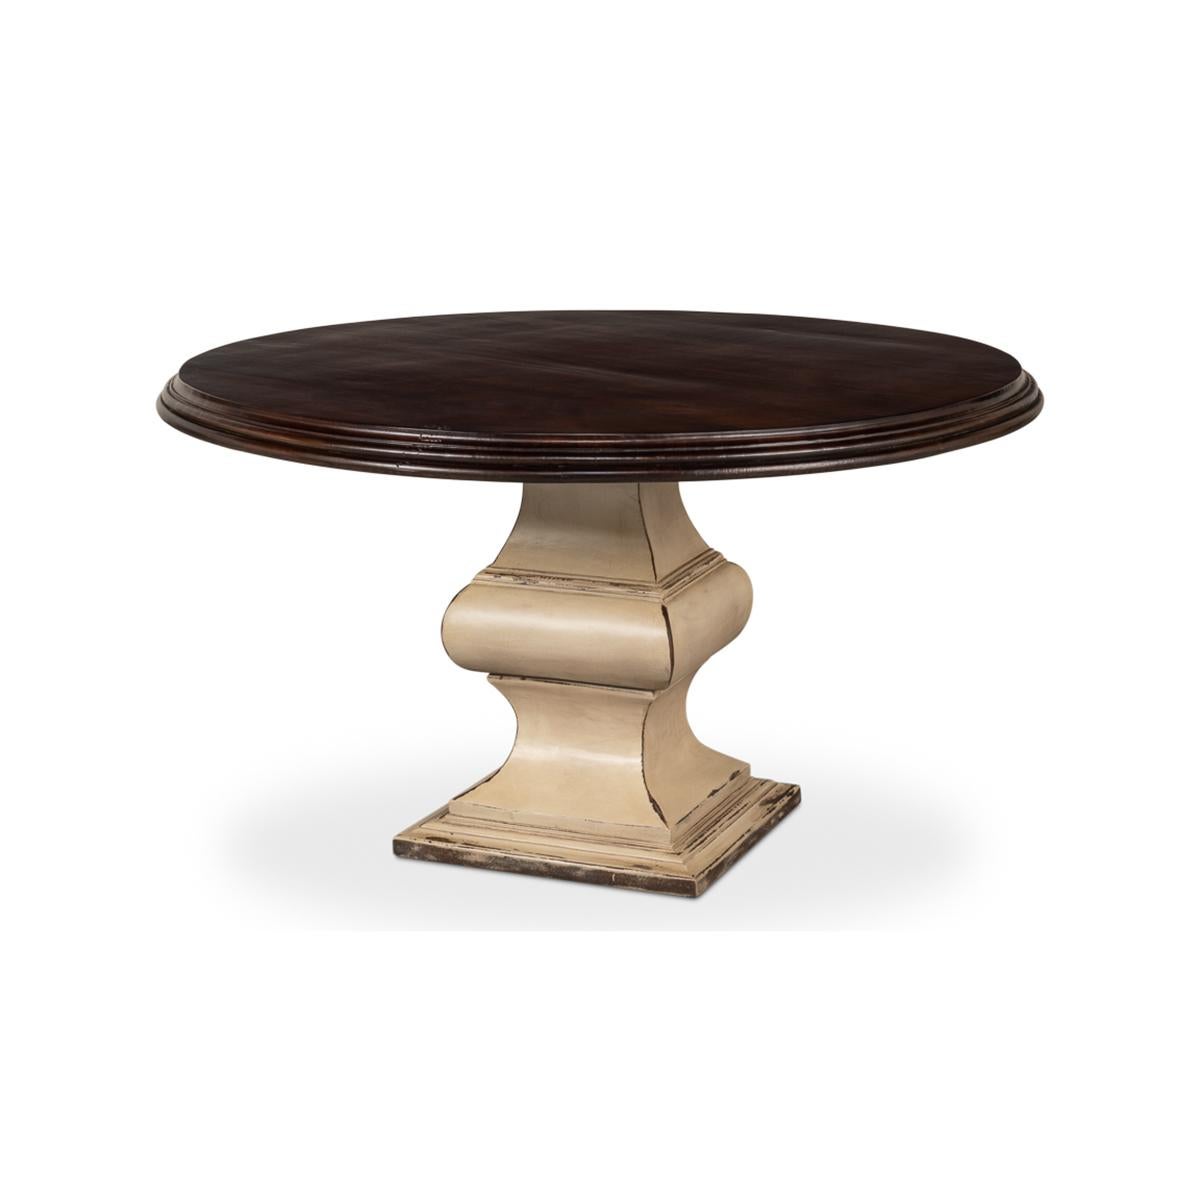 French Provincial round dining table with a dark stained round top on a strong architectural pedestal base with an antiqued cream-painted finish. The warm earth tones of this special dining table allow it to be the star of any dining area or the